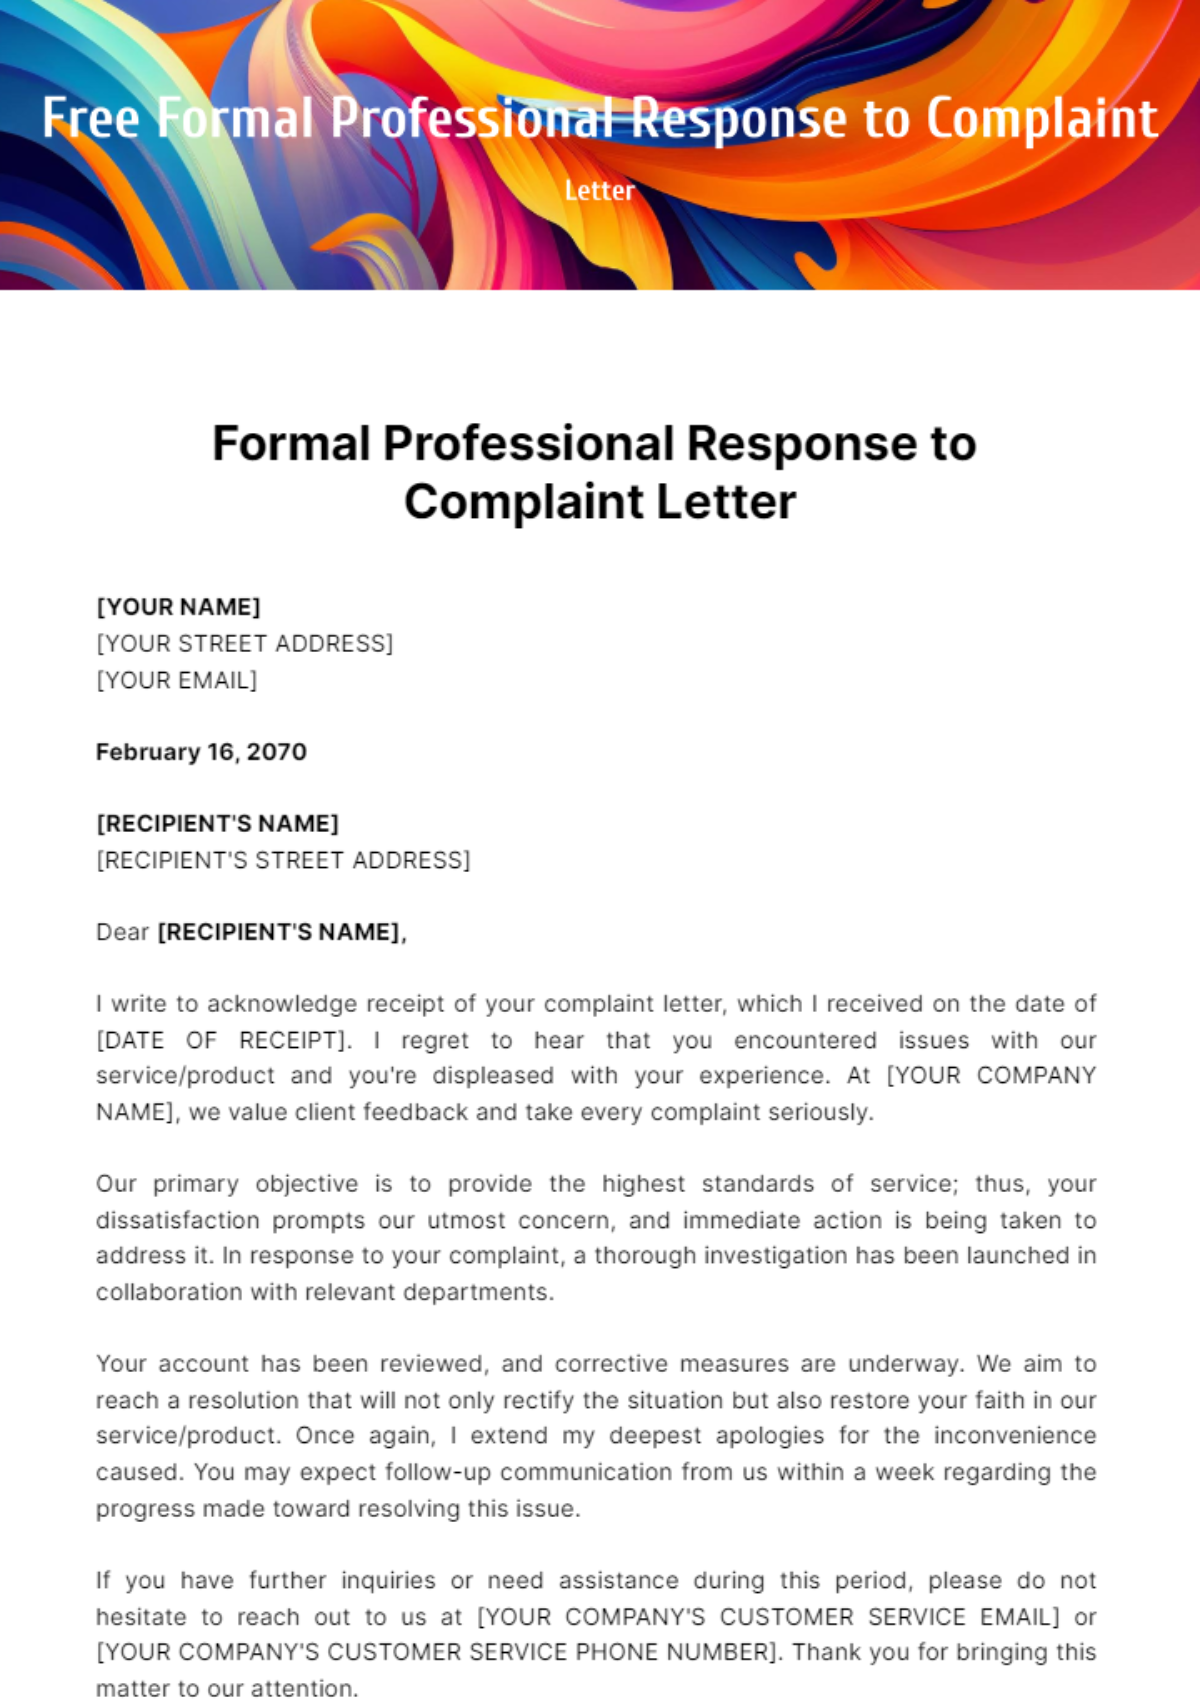 Free Formal Professional Response to Complaint Letter Template